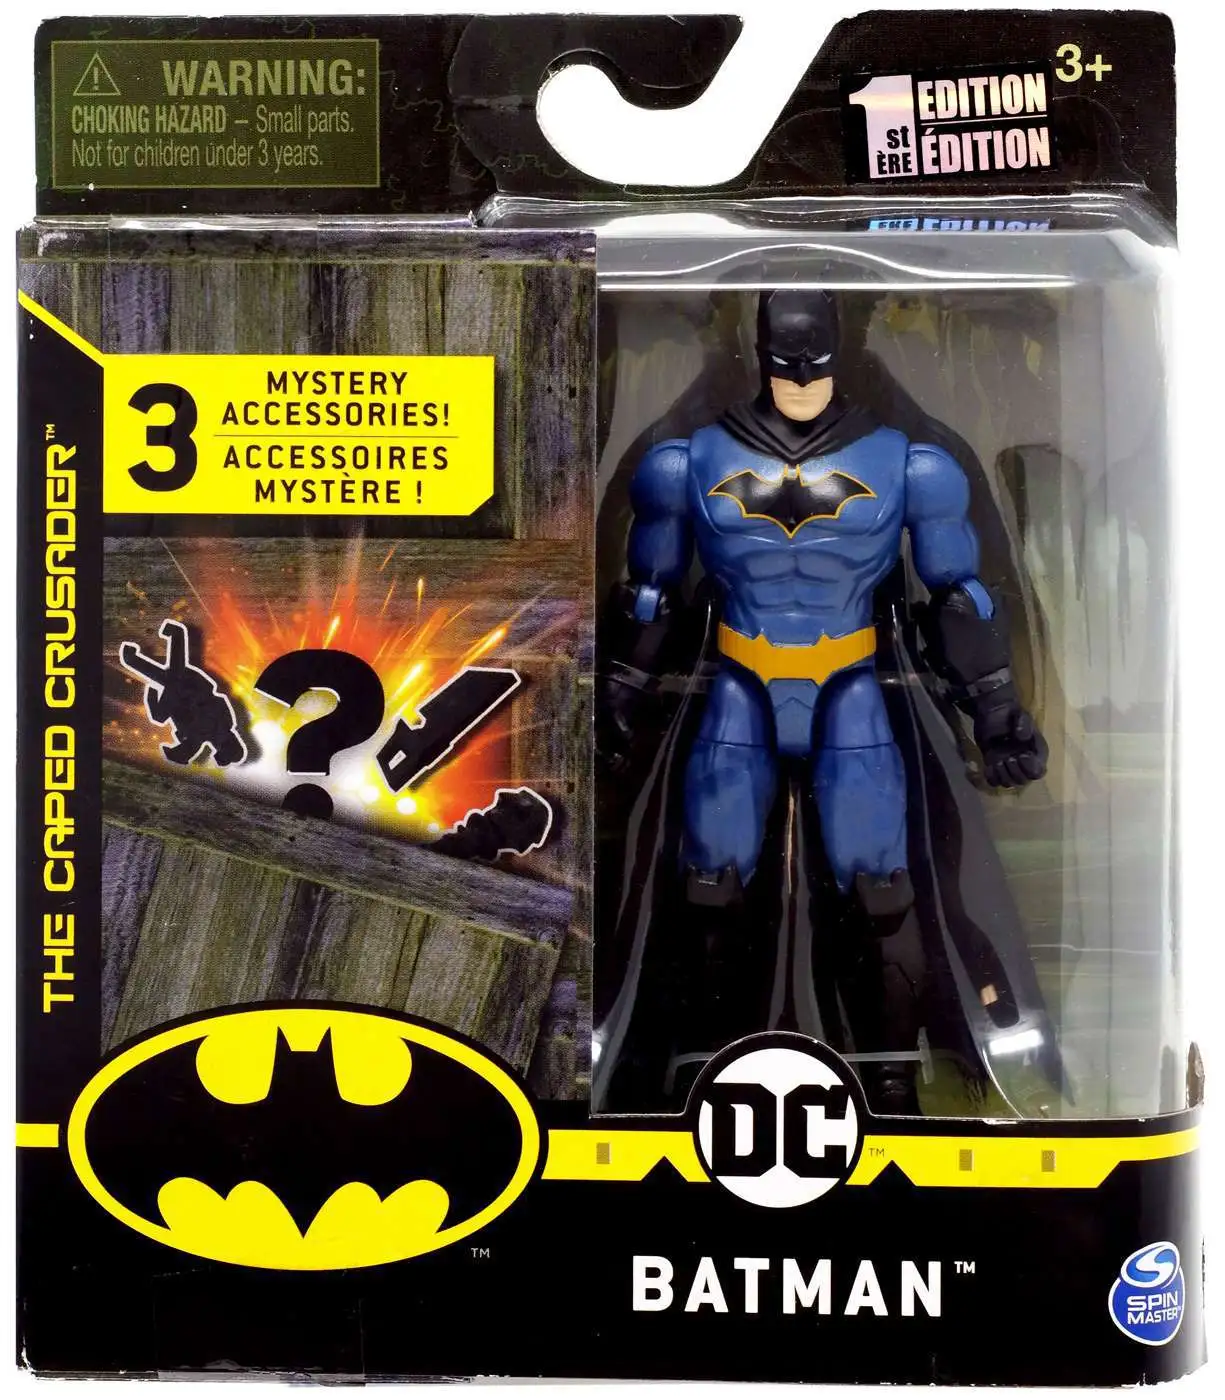 The Caped Crusader Armored Batman 4" Action Figure with 3 Mystery Accessories 